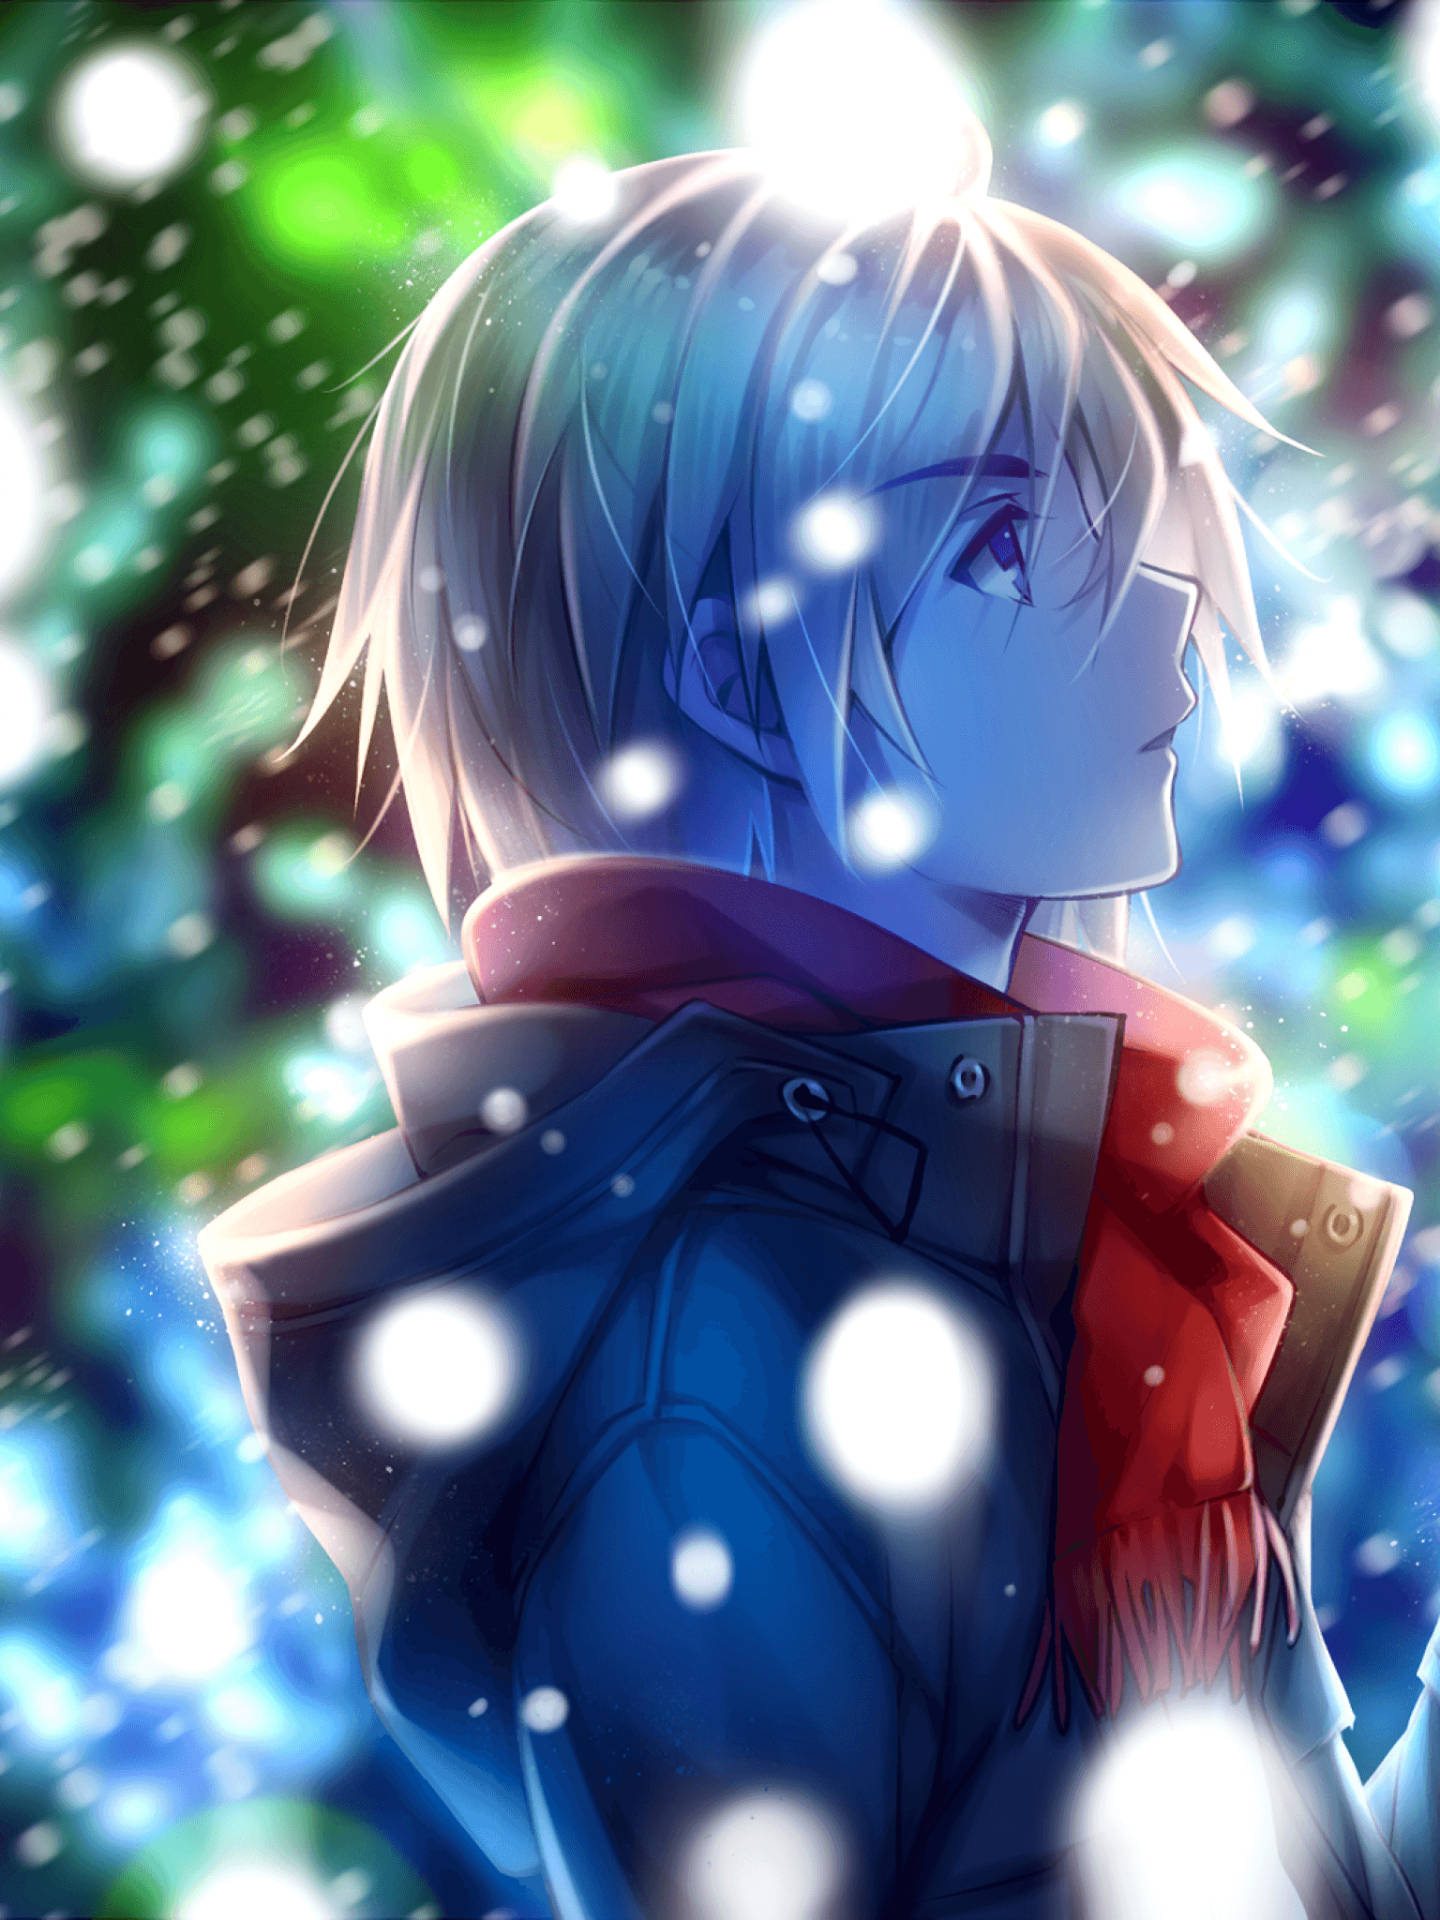 Caption: "Anime Character Contemplating Under the Stars" Wallpaper